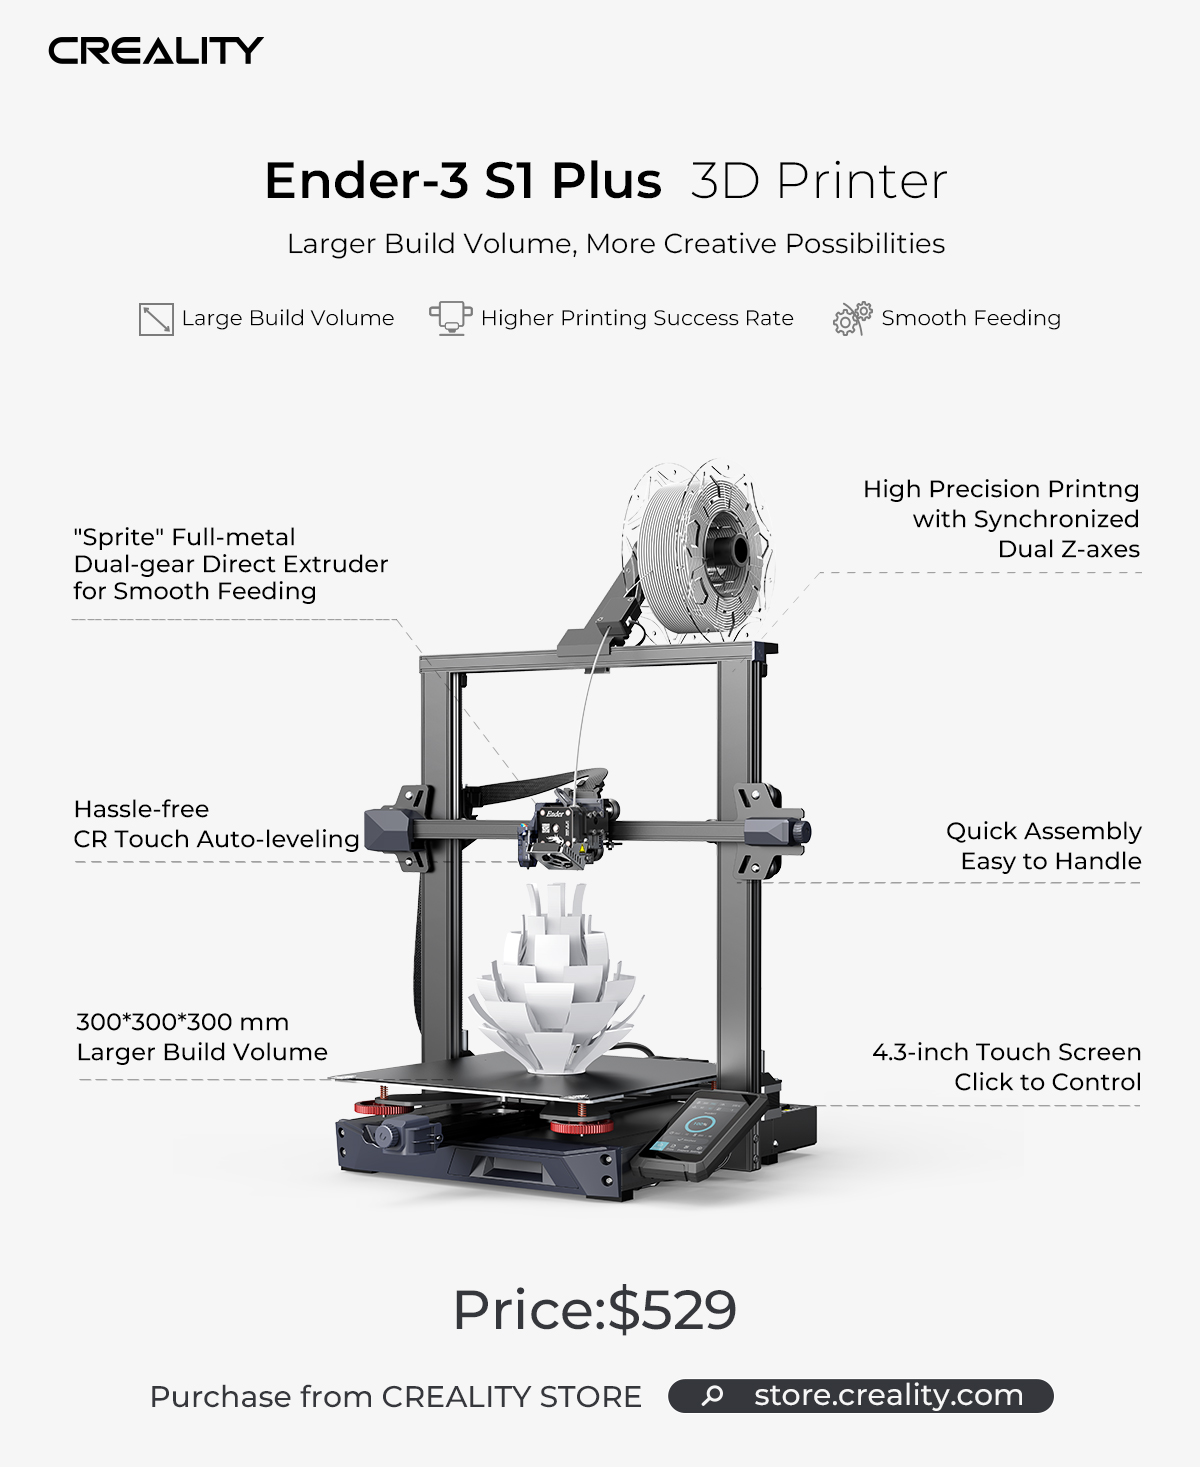 Ender 3 S1 Plus Functions9 | Creality Launches Ender-3 S1 Plus – the Sizeable Smart 3D Printer for Prosumers